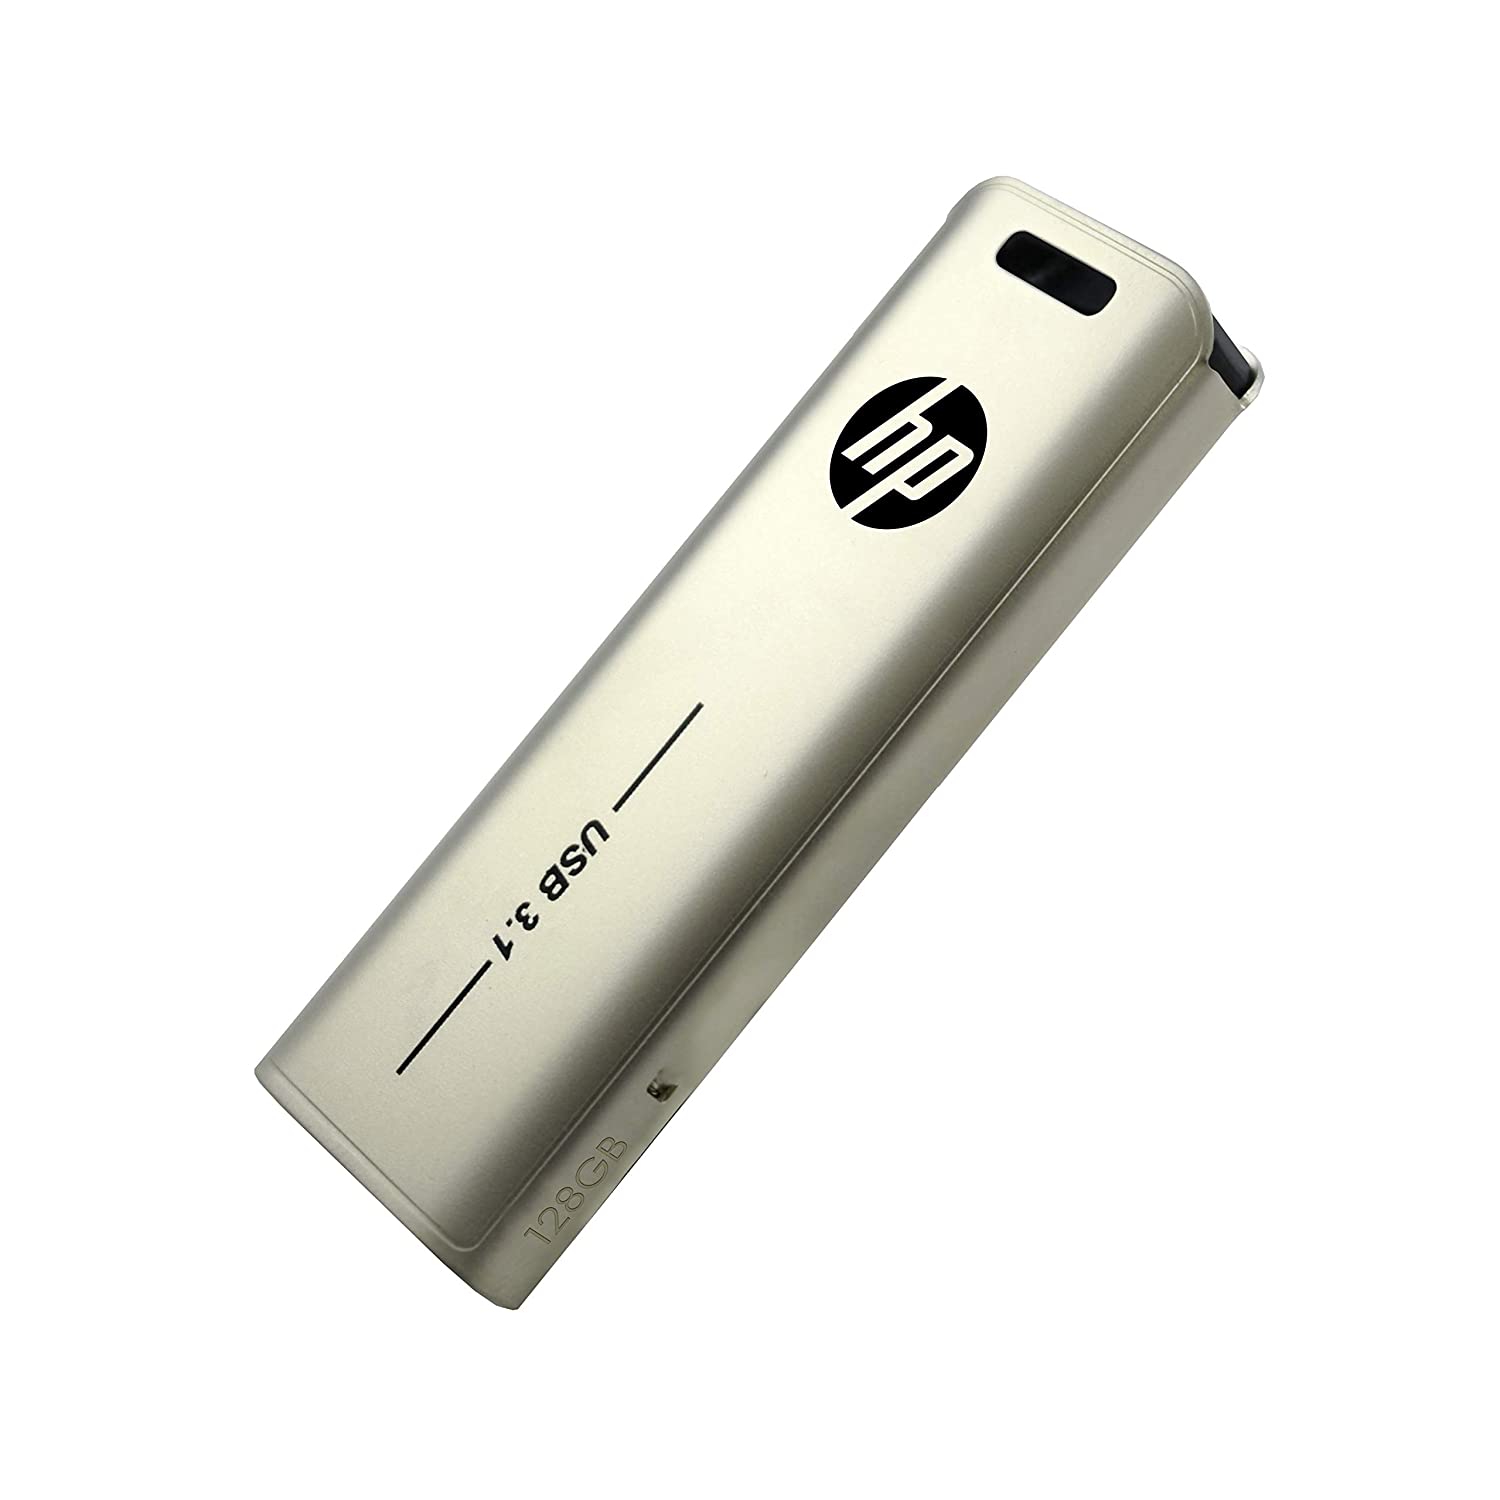 HP x796w 128GB Pen Drive - for Computer & Laptop at XLela